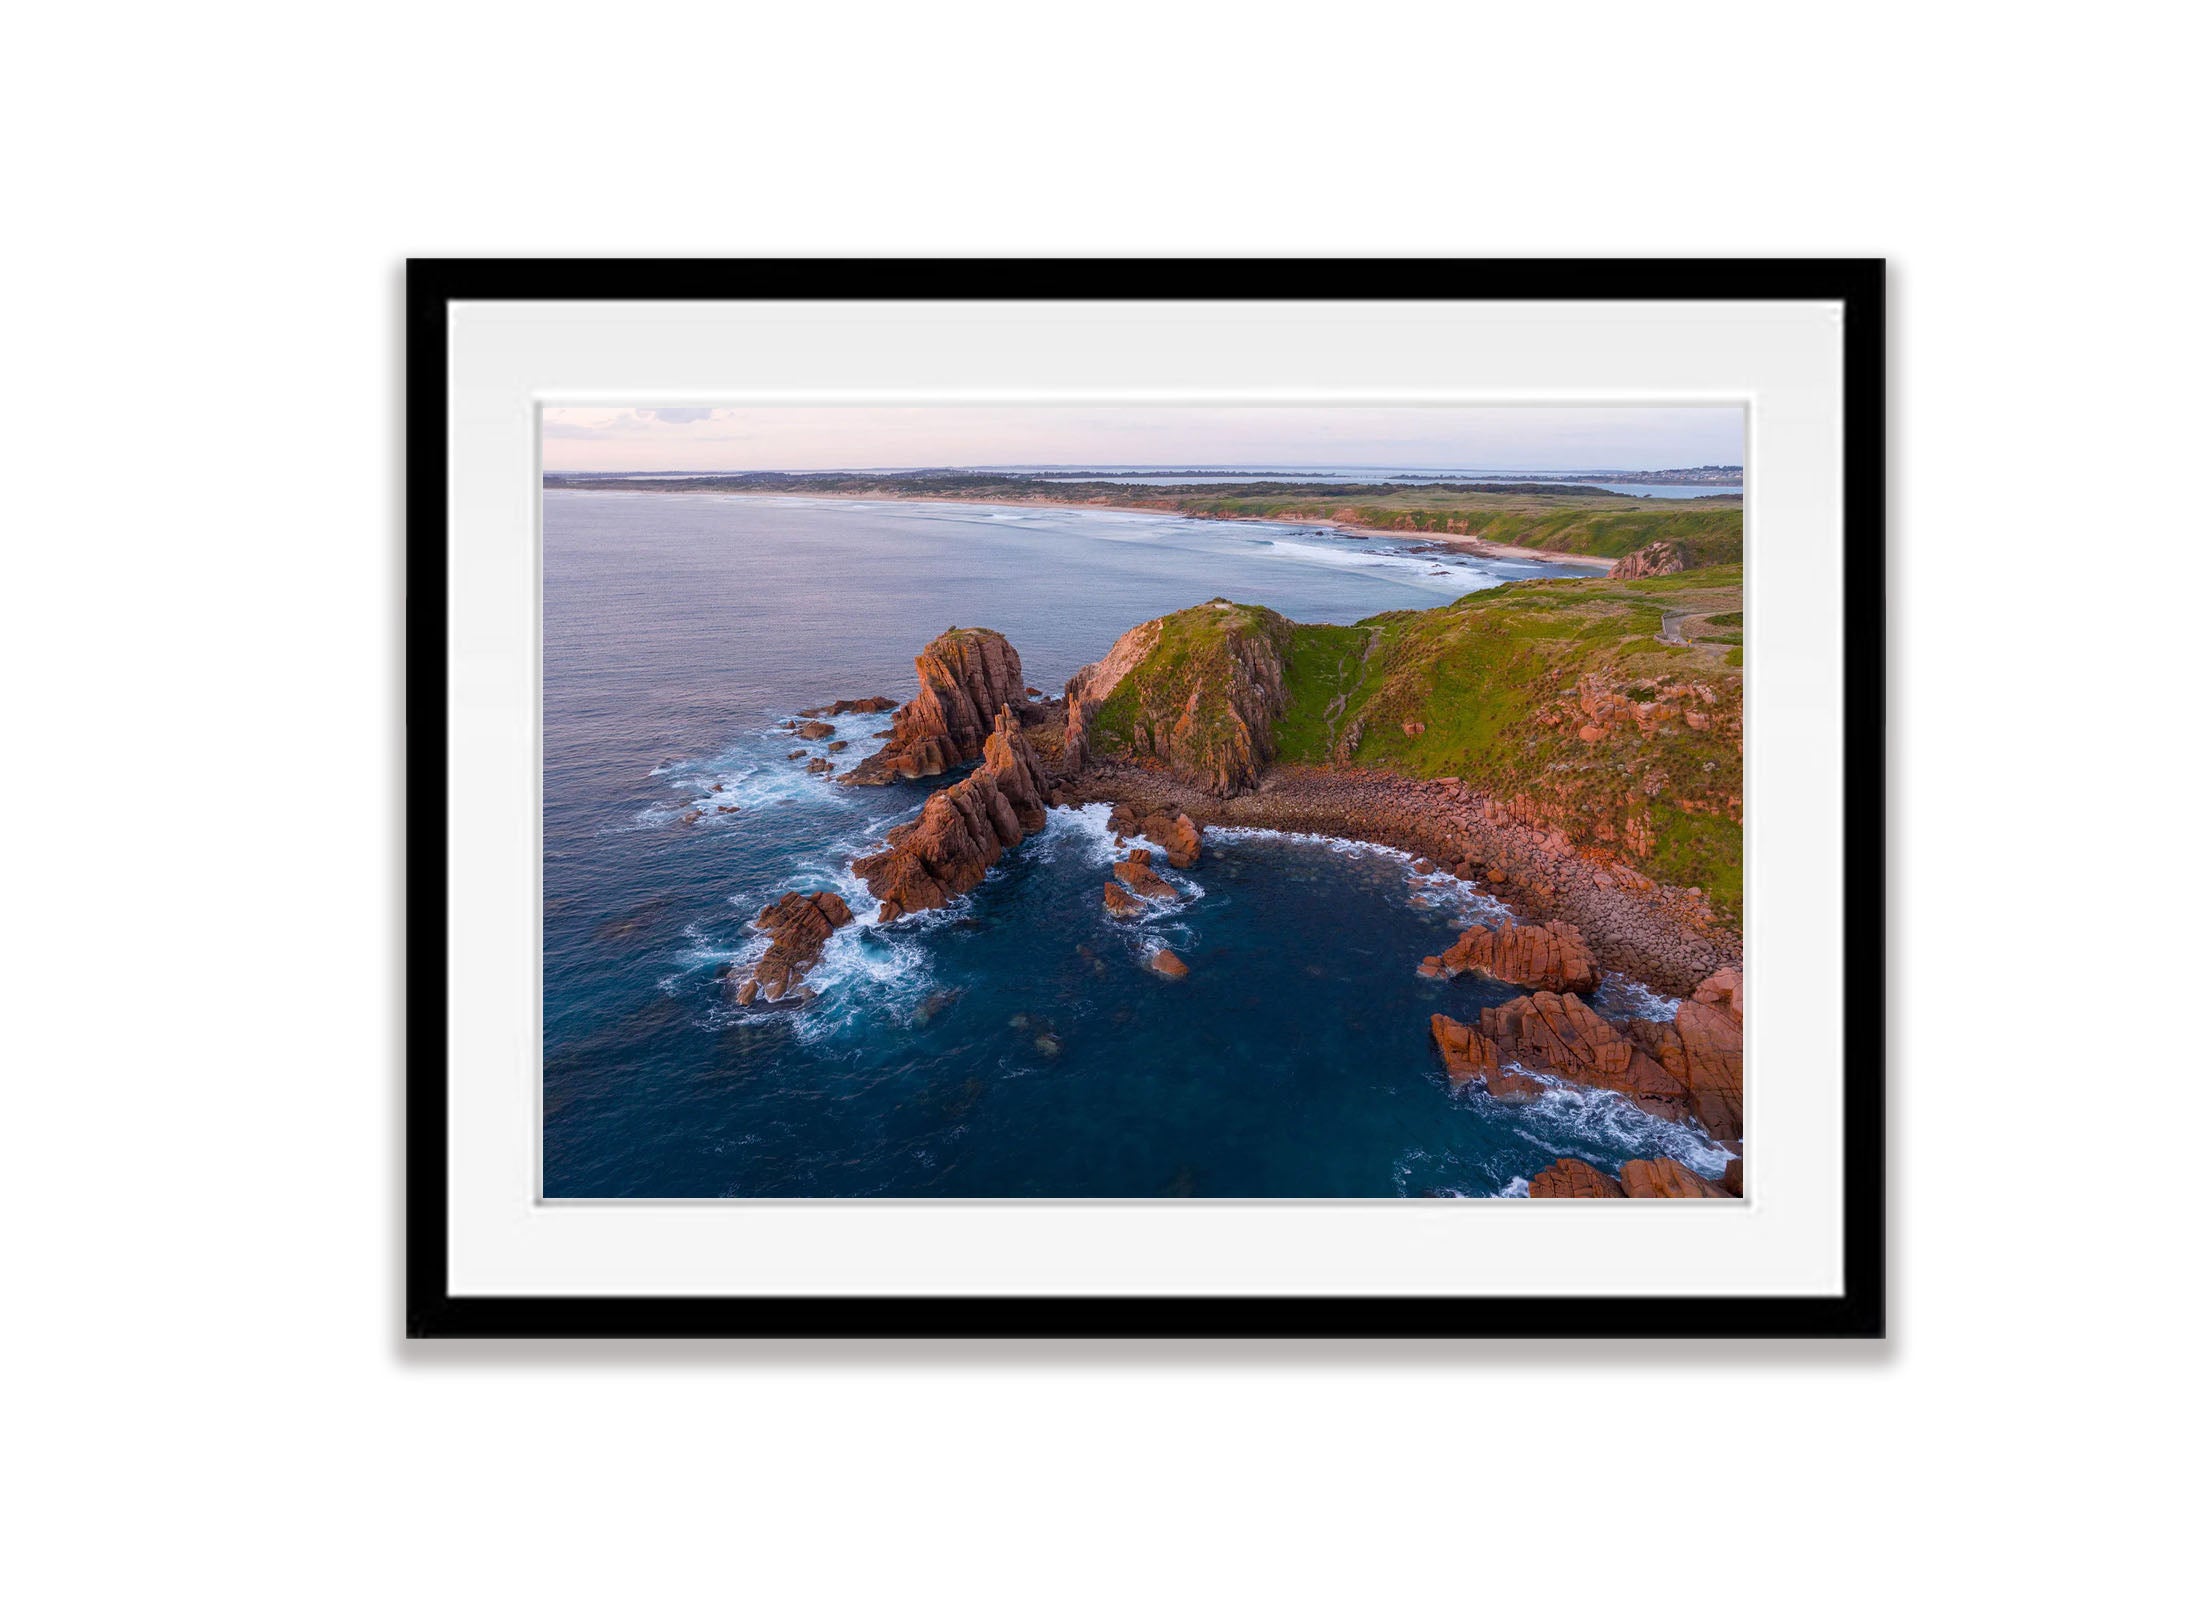 Cape Woolamai at sunset from above